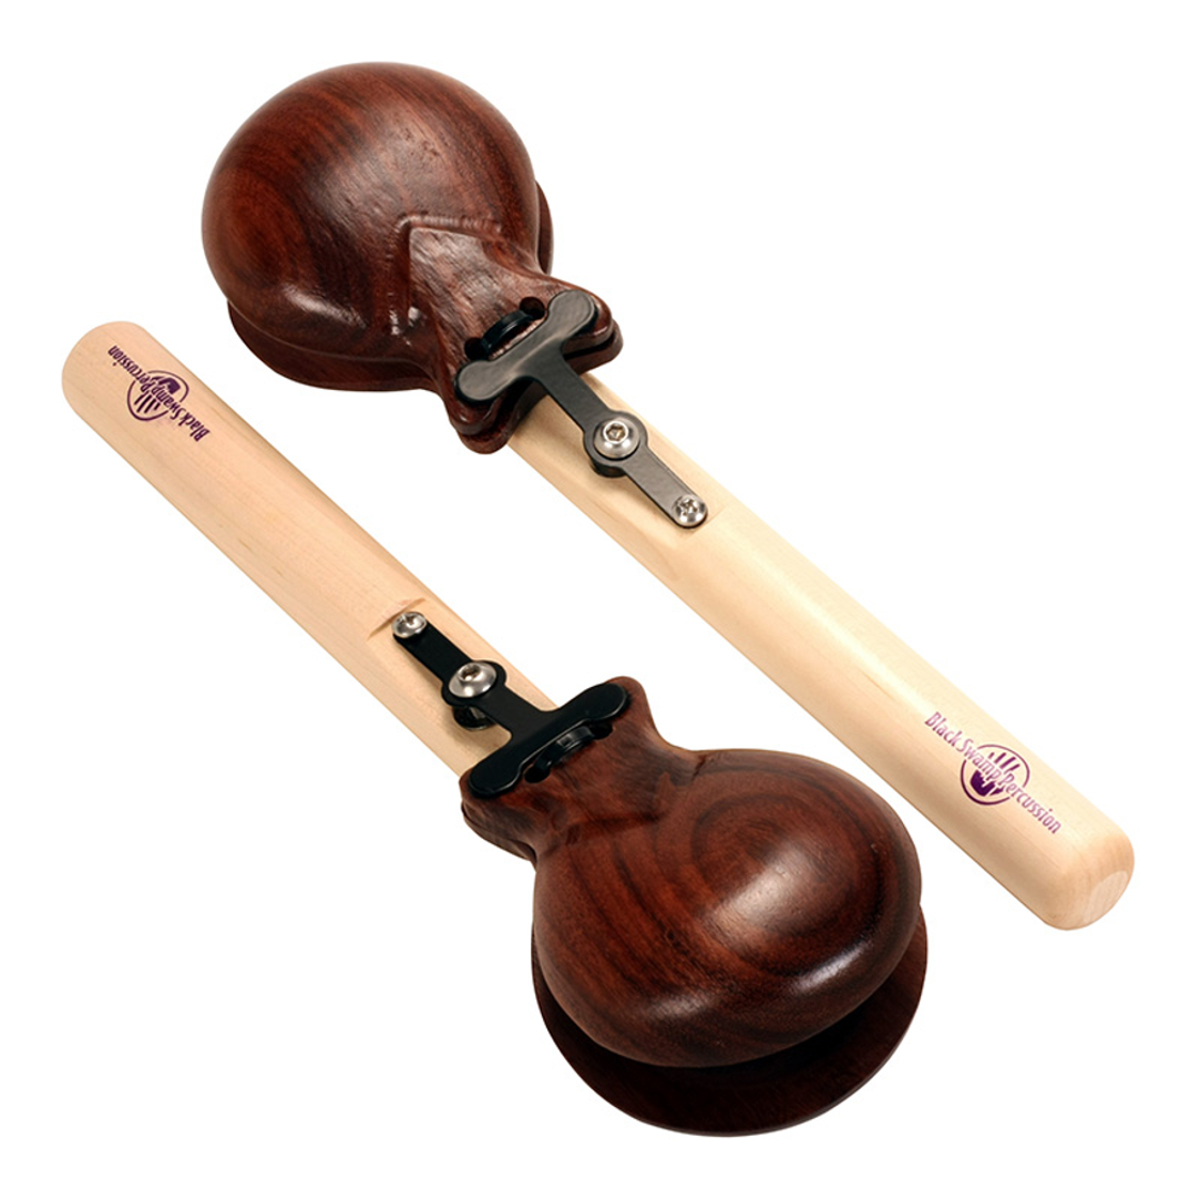 Black Swamp Percussion Castanets, Large Rosewood